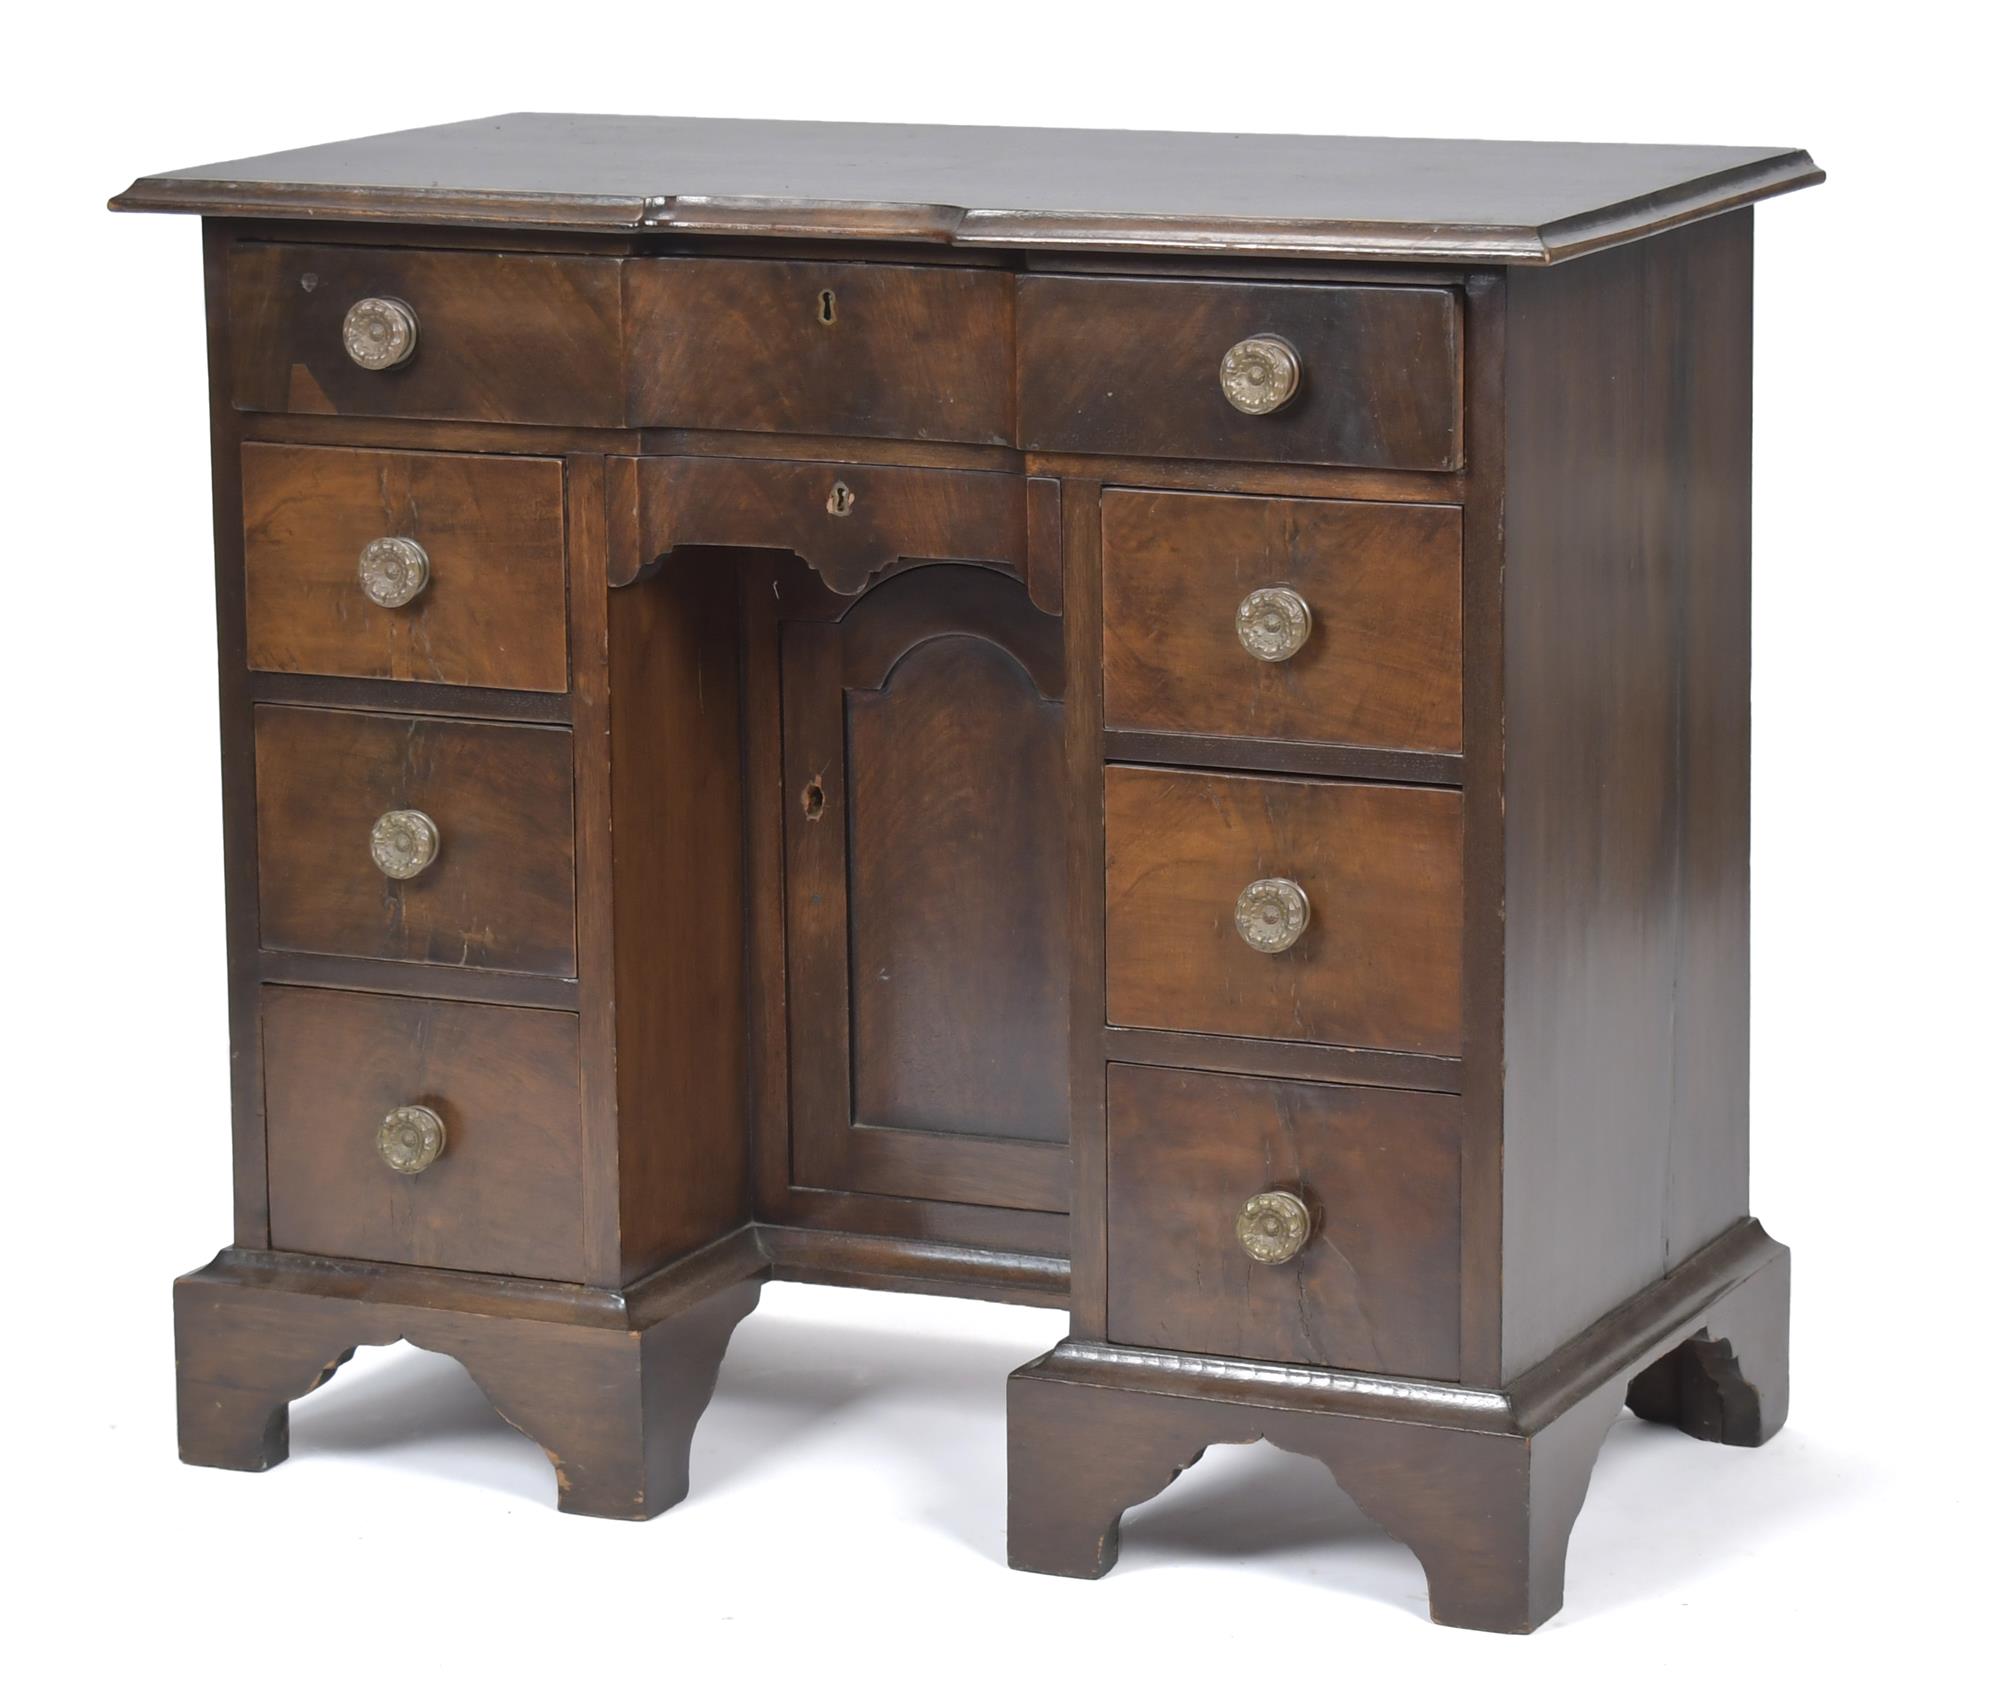 19TH C. CHIPPENDALE WALNUT KNEE